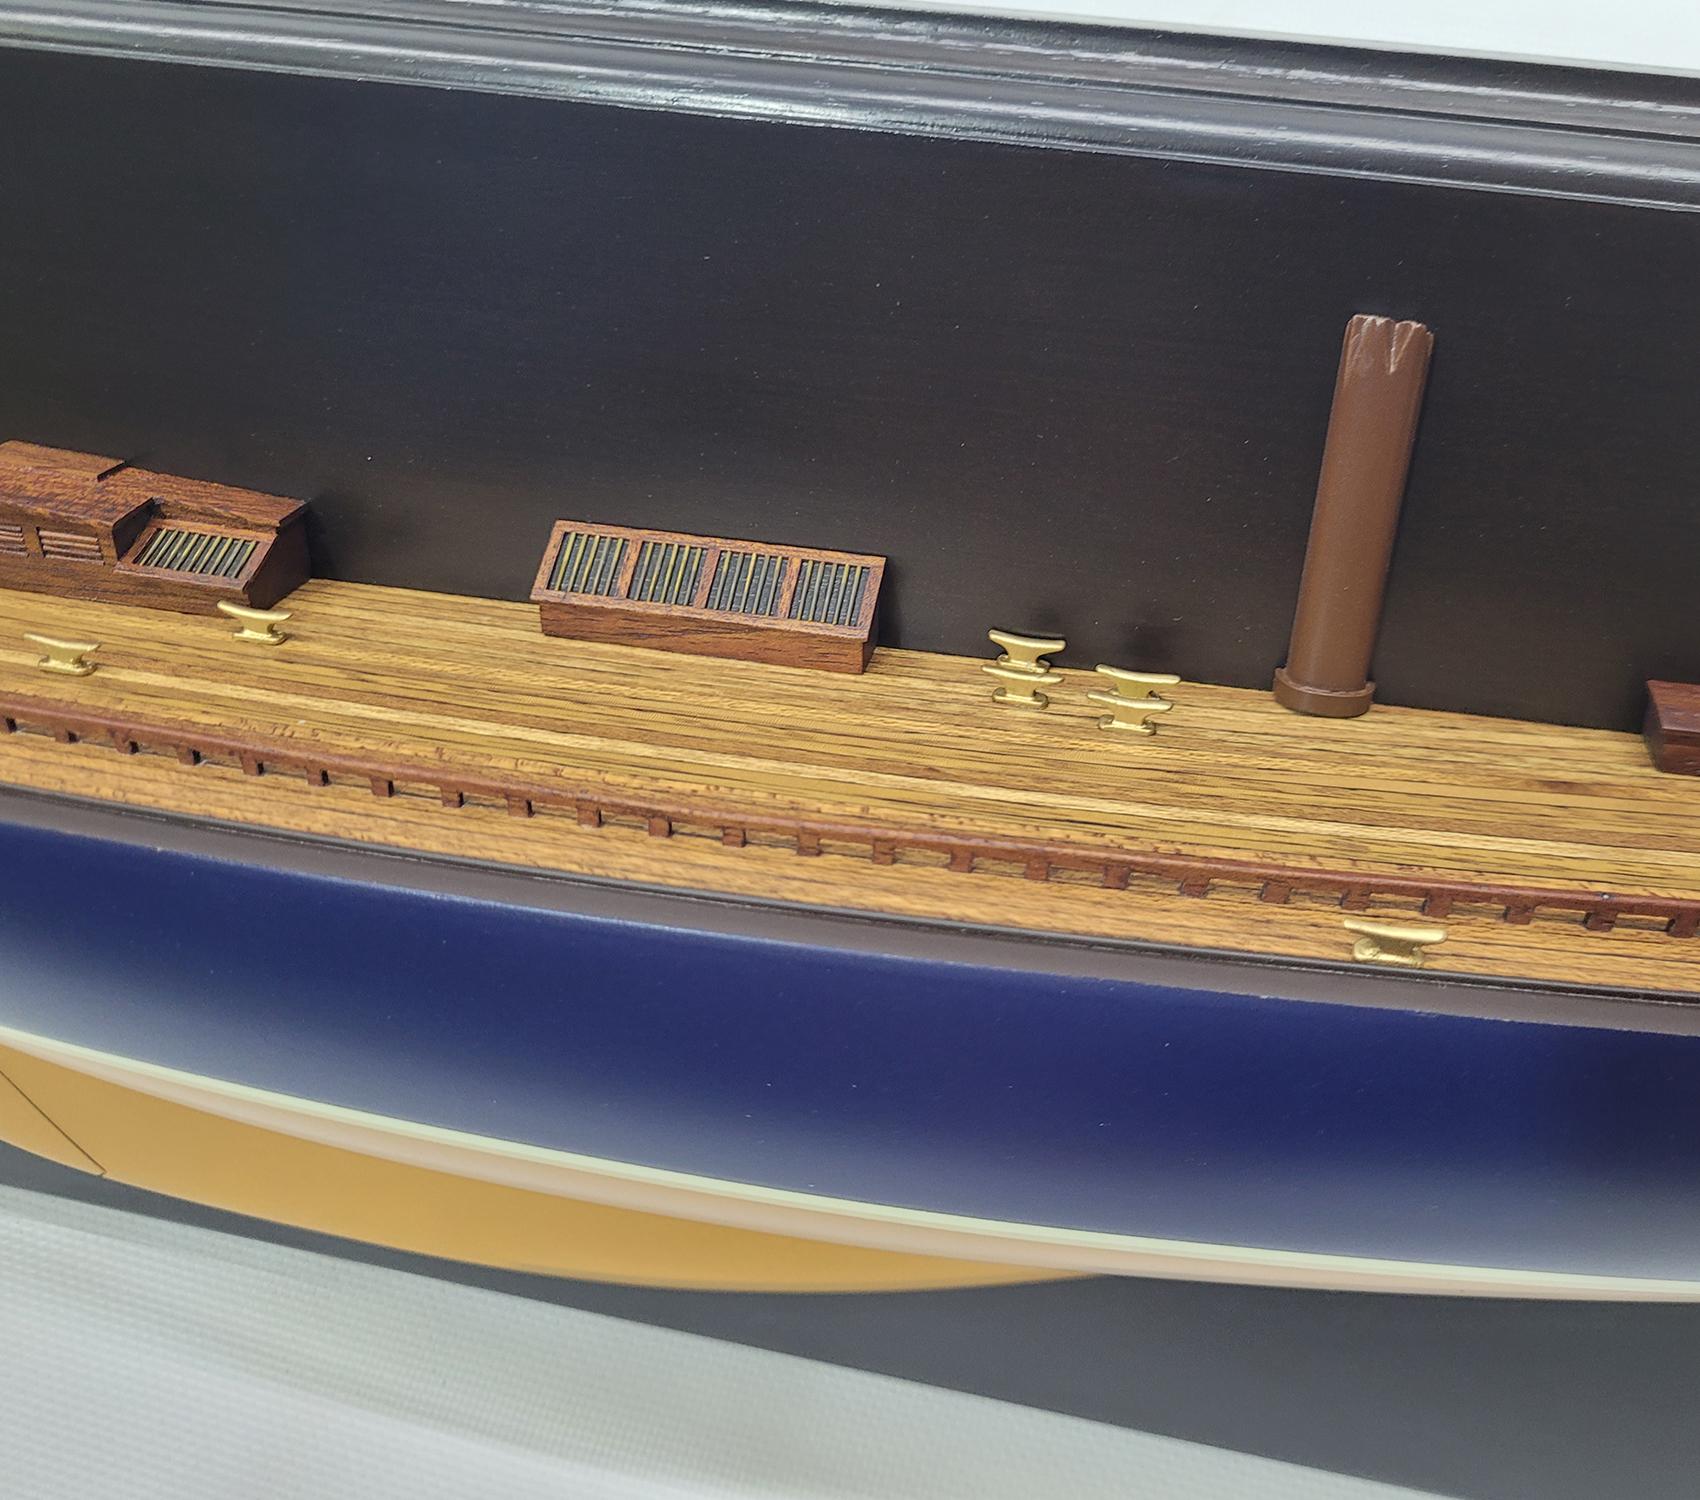 Half Model of the J Class Yacht Endeavor - Gold For Sale 3